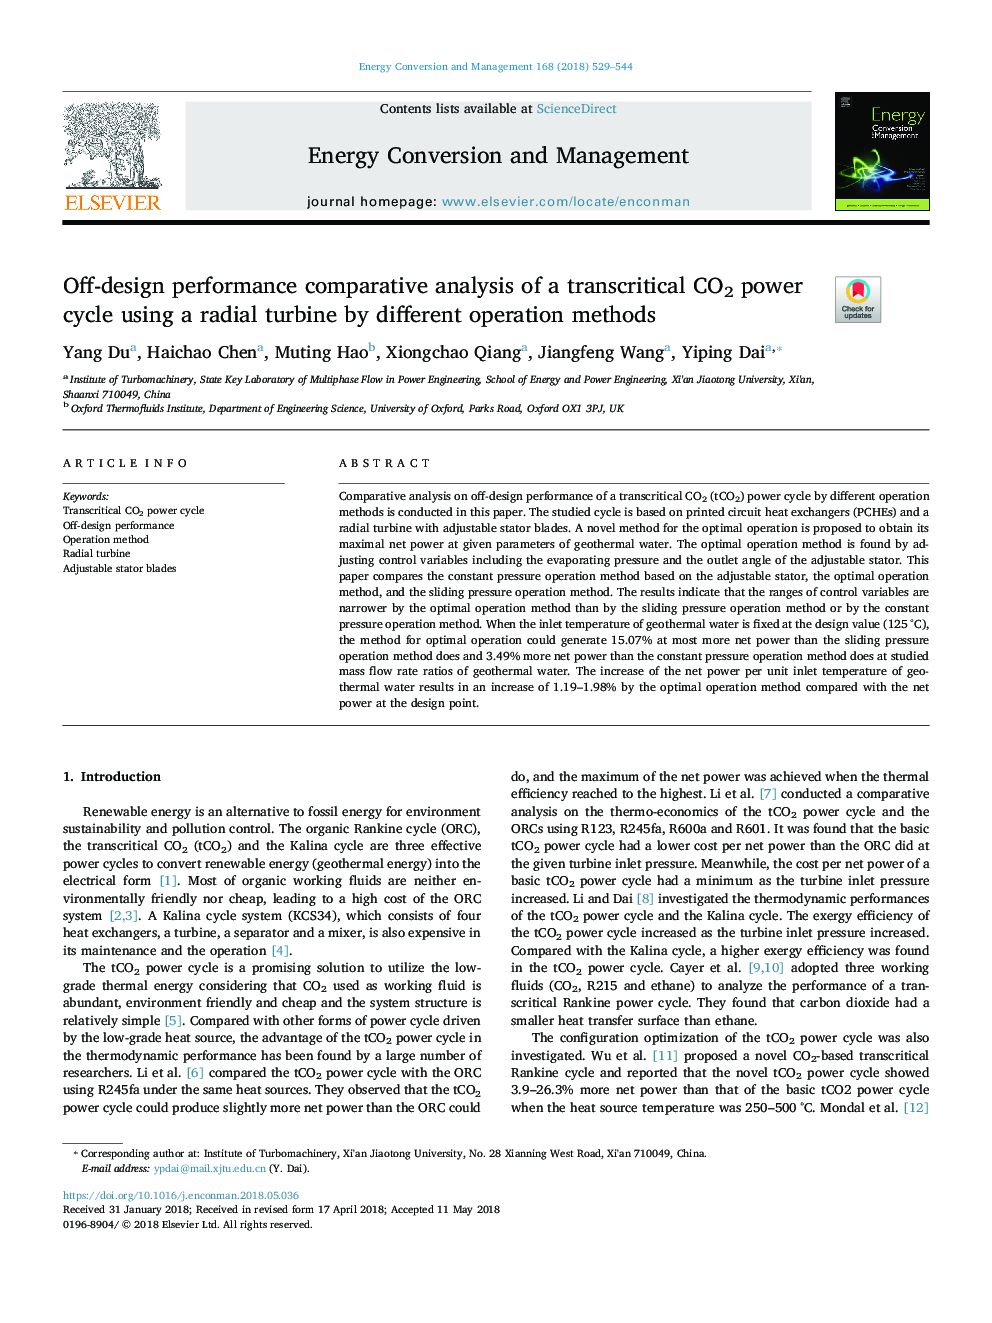 Off-design performance comparative analysis of a transcritical CO2 power cycle using a radial turbine by different operation methods